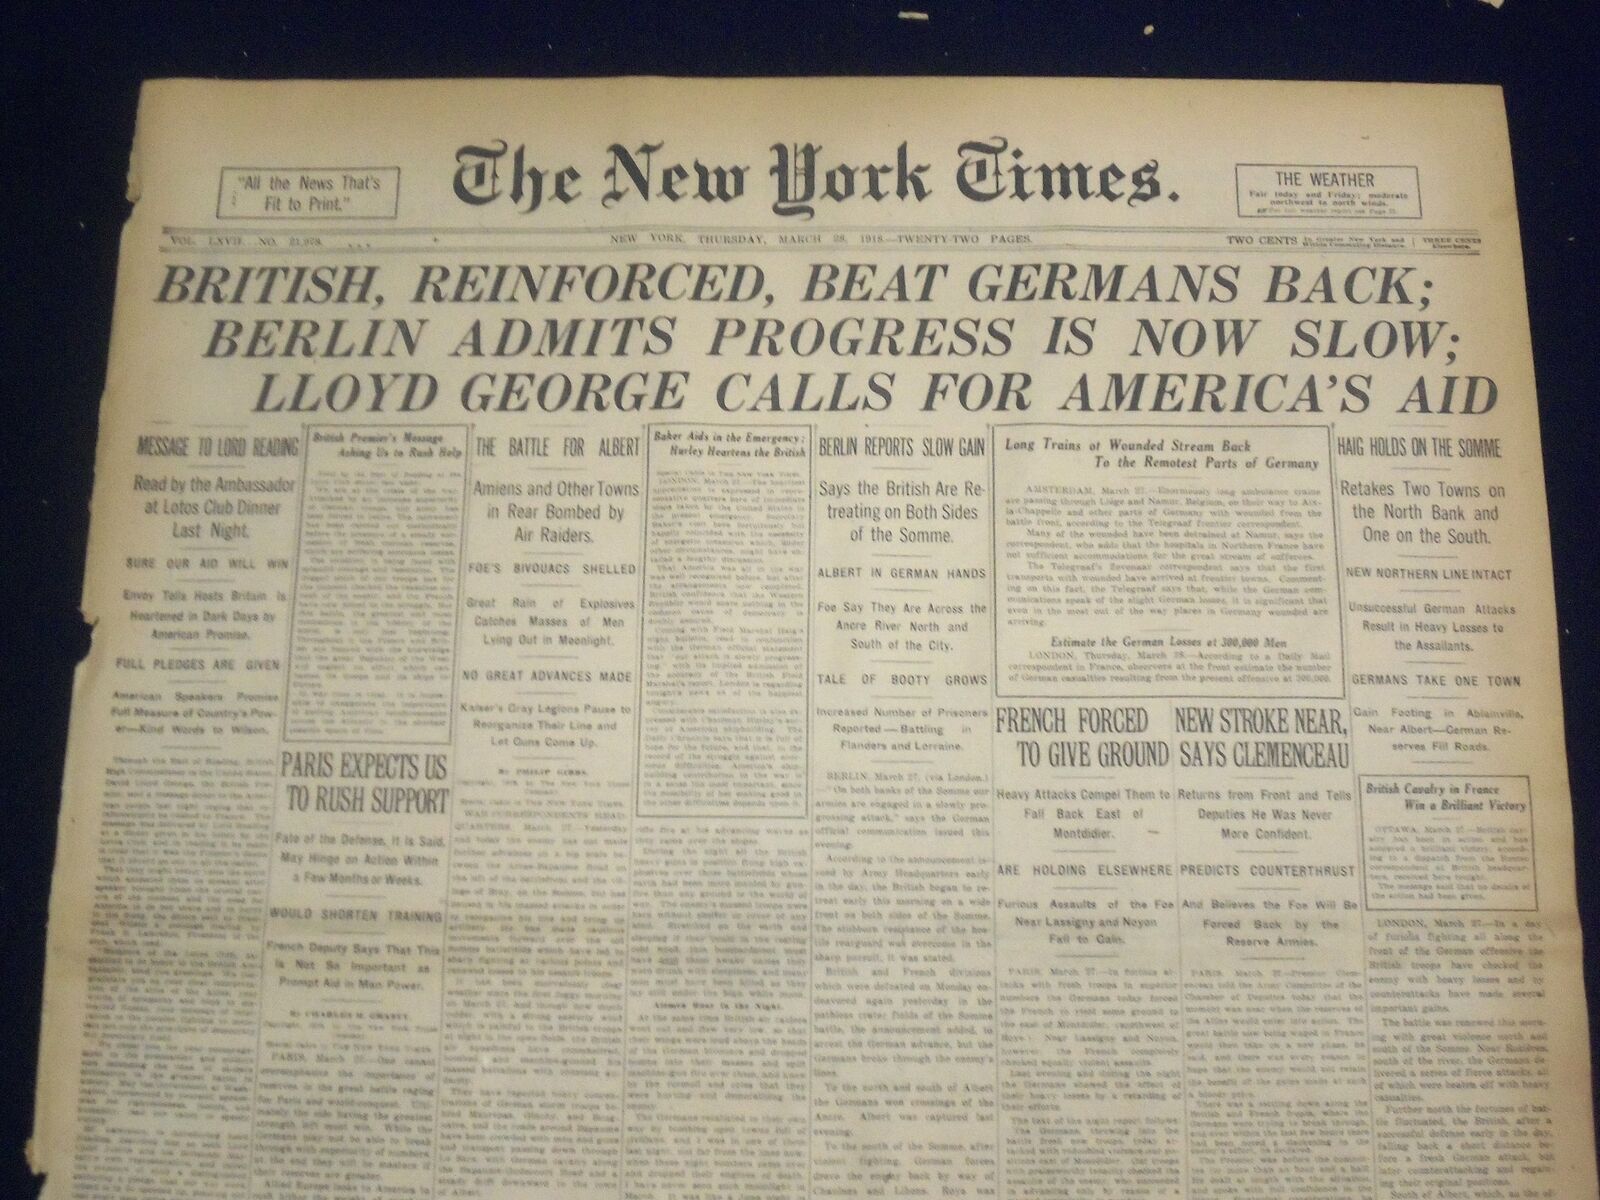 1918 MARCH 28 NEW YORK TIMES - BRITISH BEAT GERMANS BACK - NT 8157